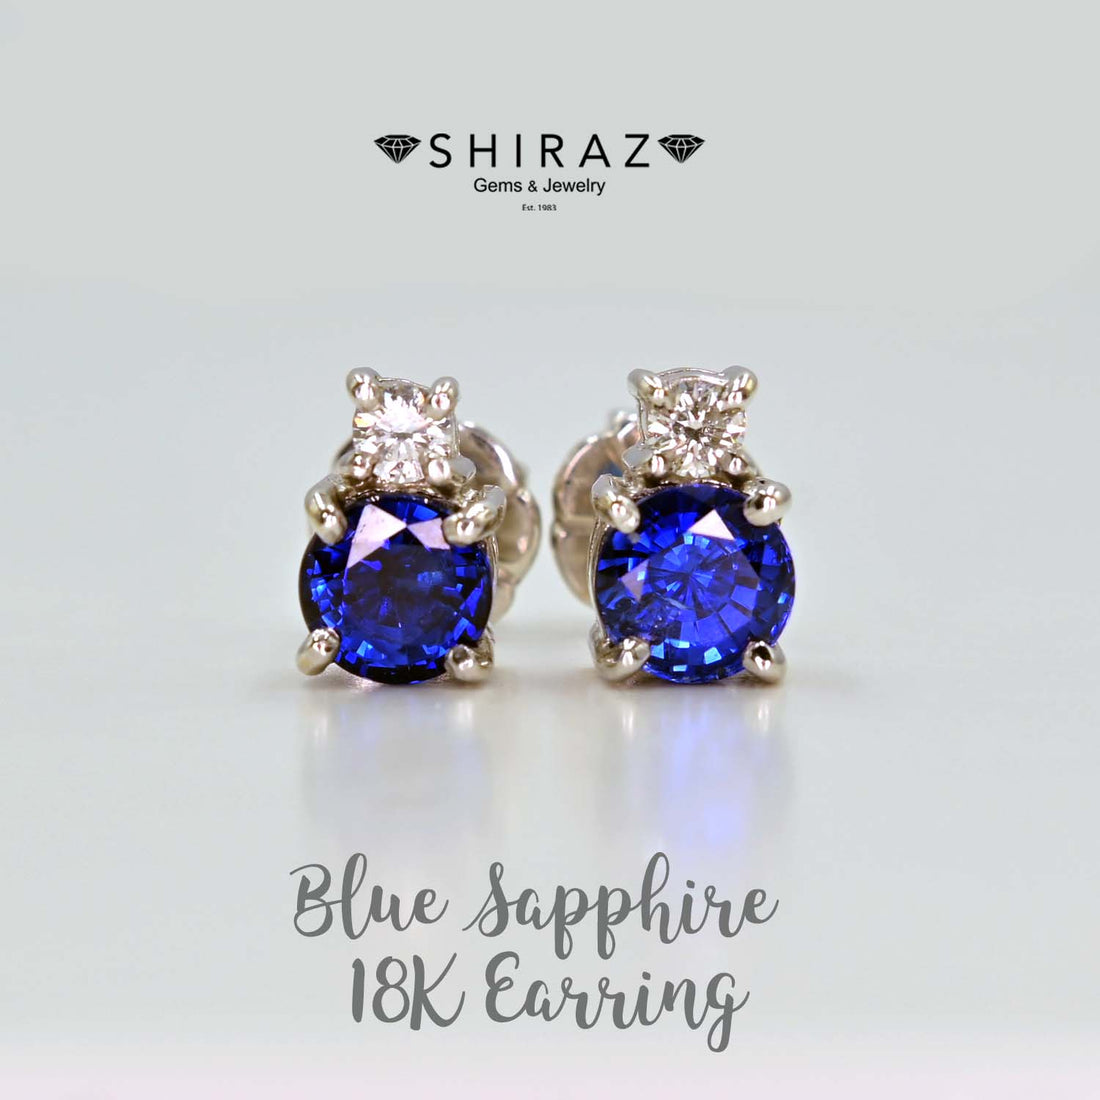 Stunnng handmade blue sapphire ring in 18K made by Shiraz Jewelry.